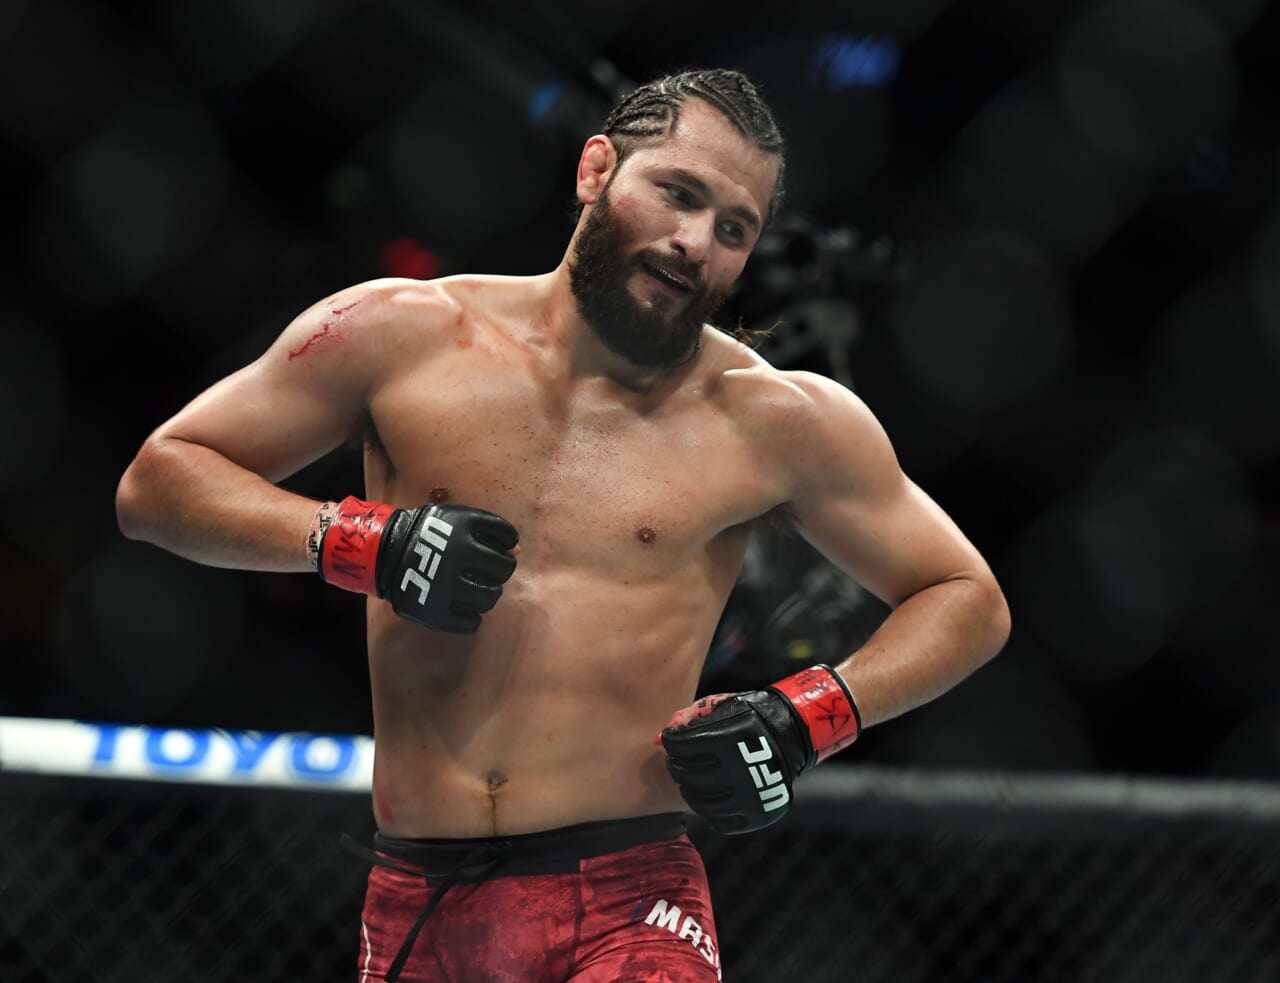 Could Masvidal – Covington be the first UFC event in the US with fans?